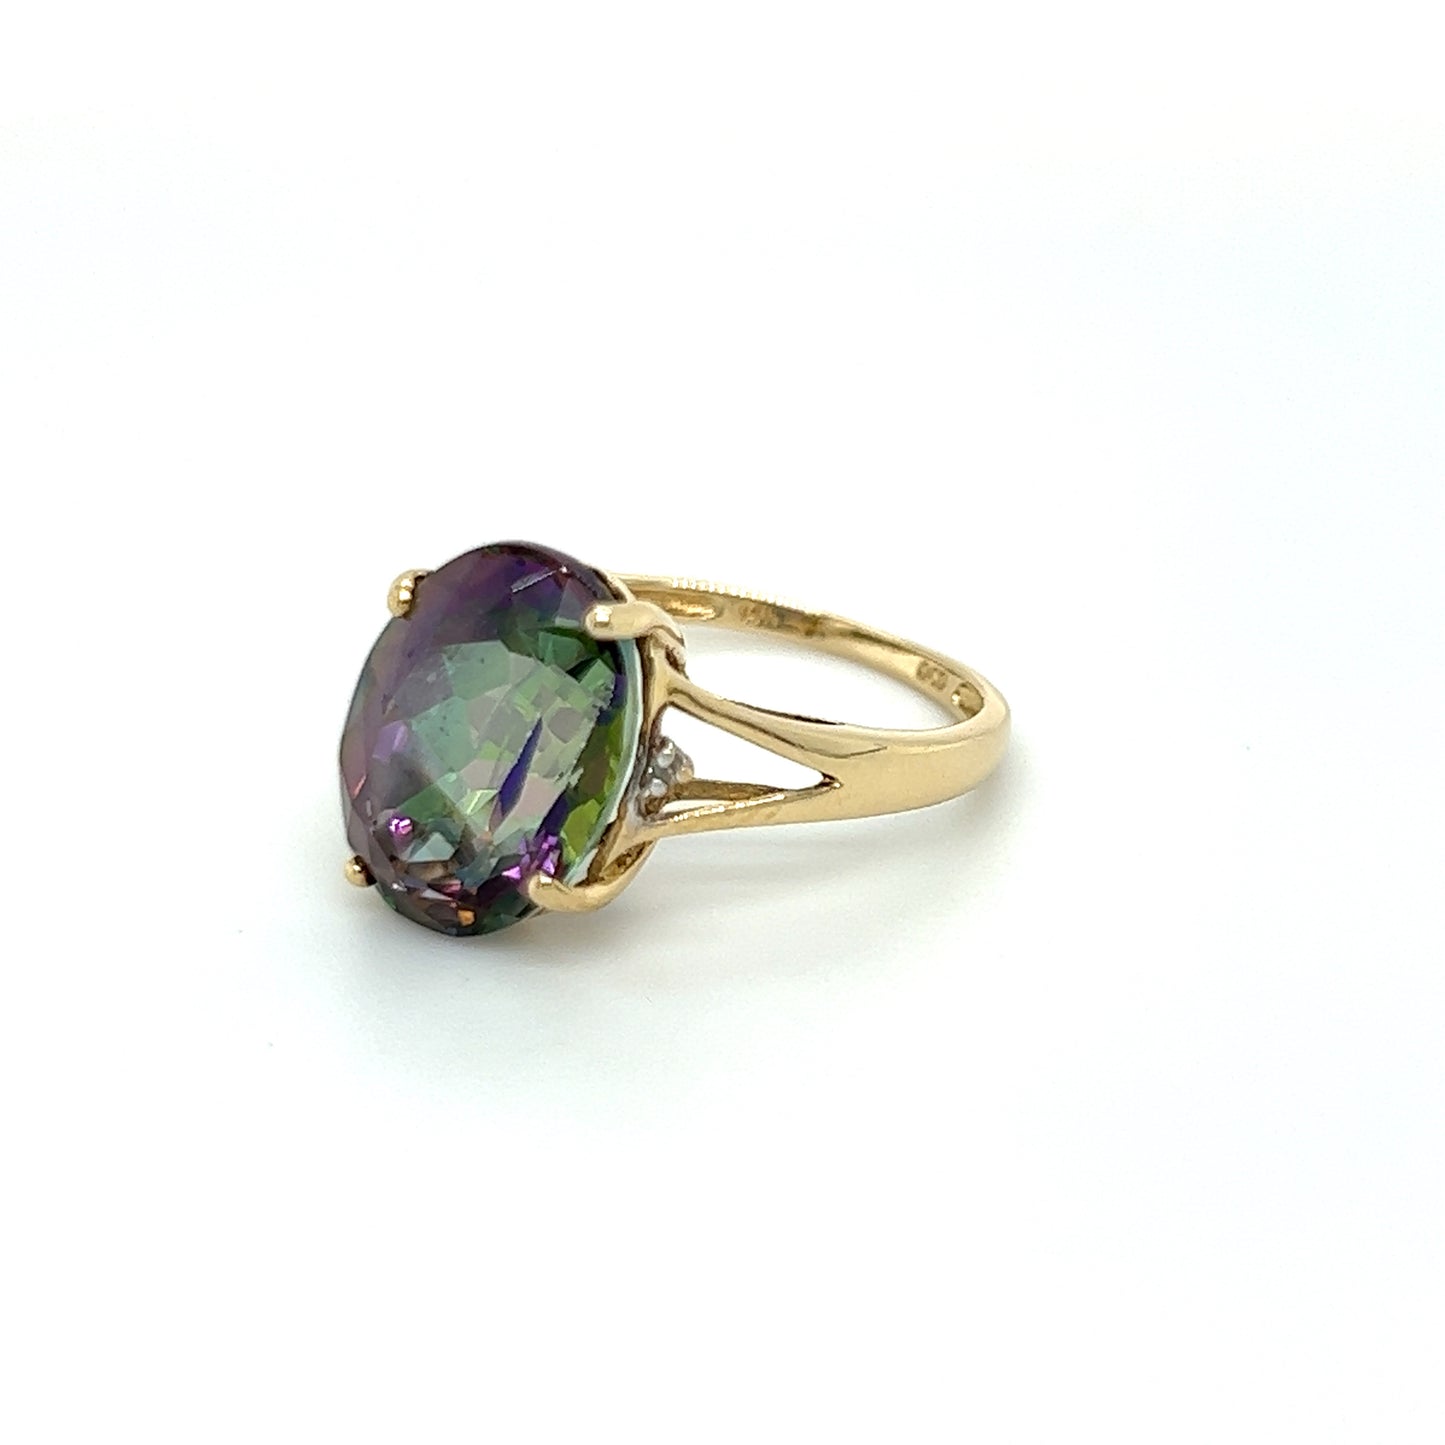 14K Yellow Gold Lady's Ring With Mystic Topaz Gemstone